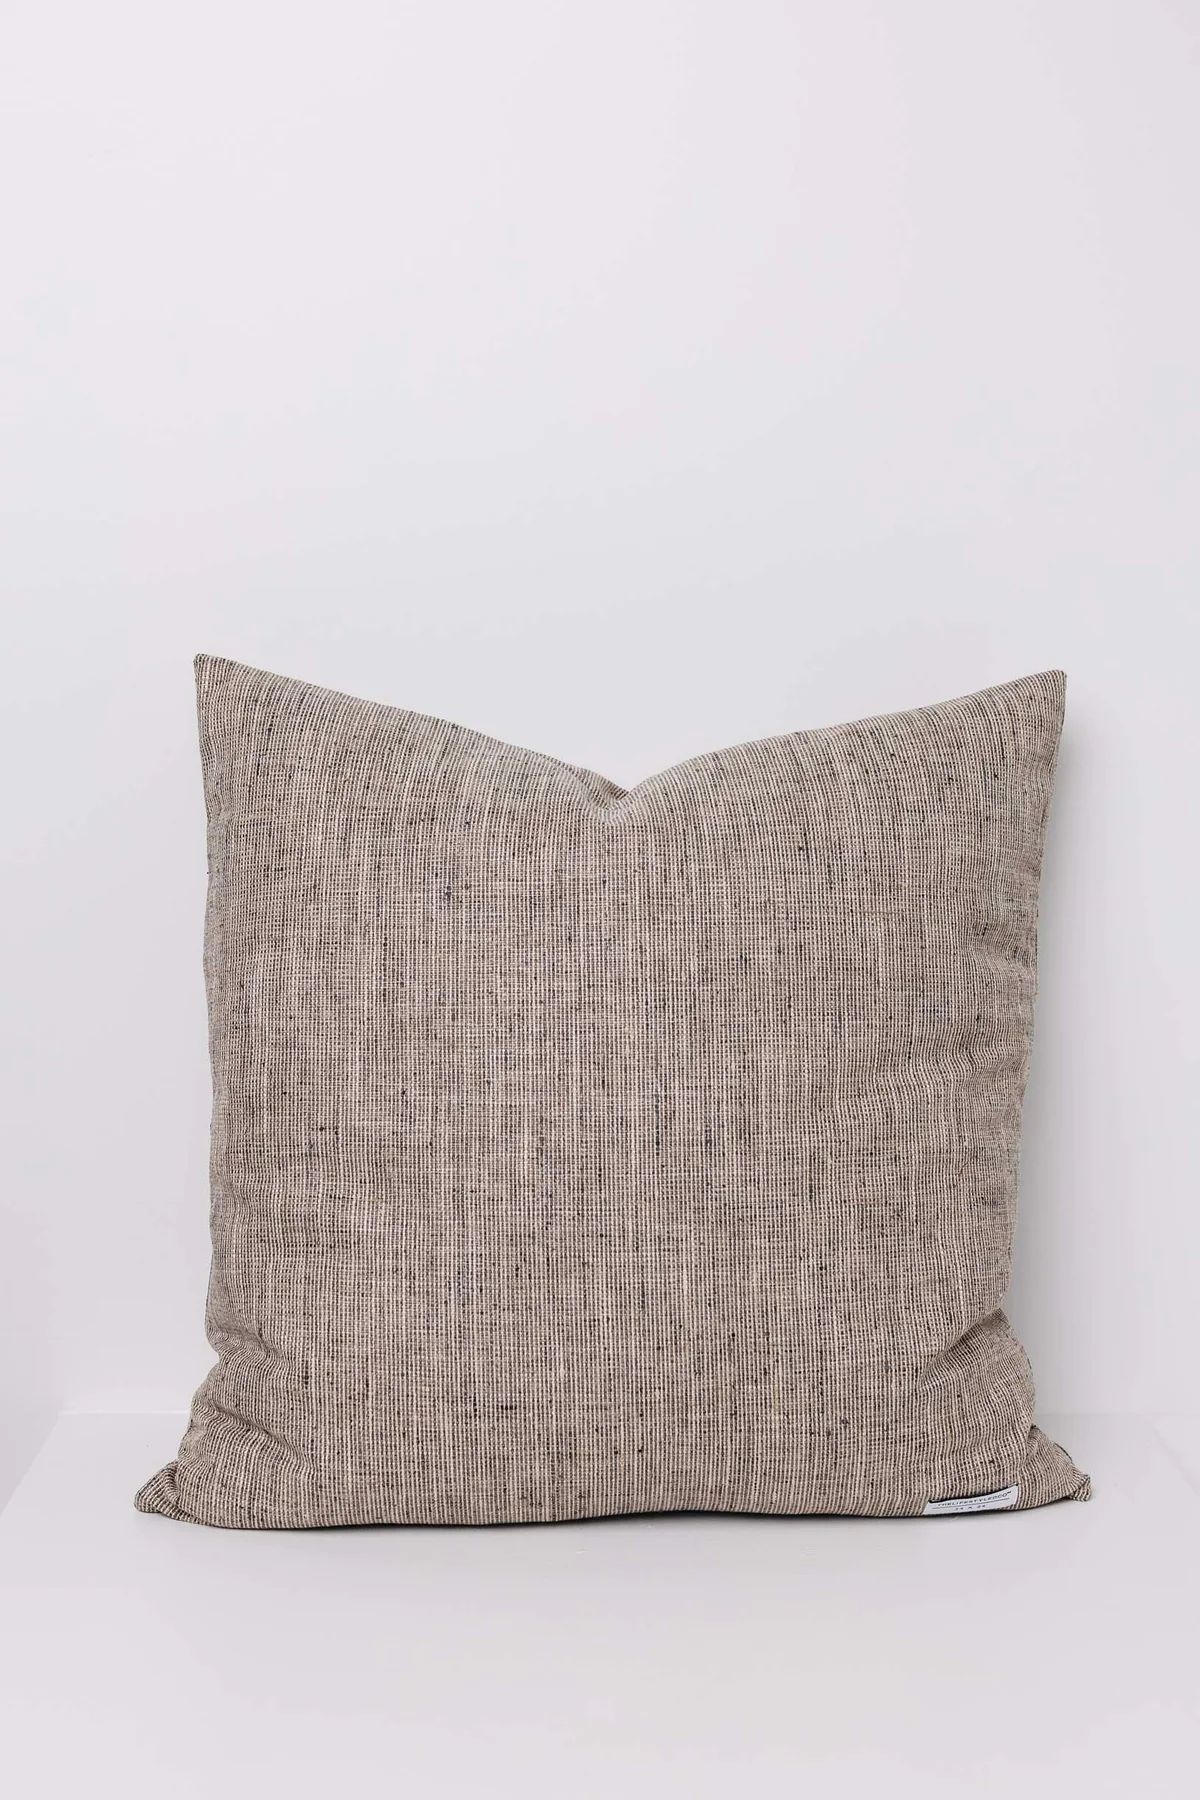 Hartley Textured Tweed Pillow | THELIFESTYLEDCO